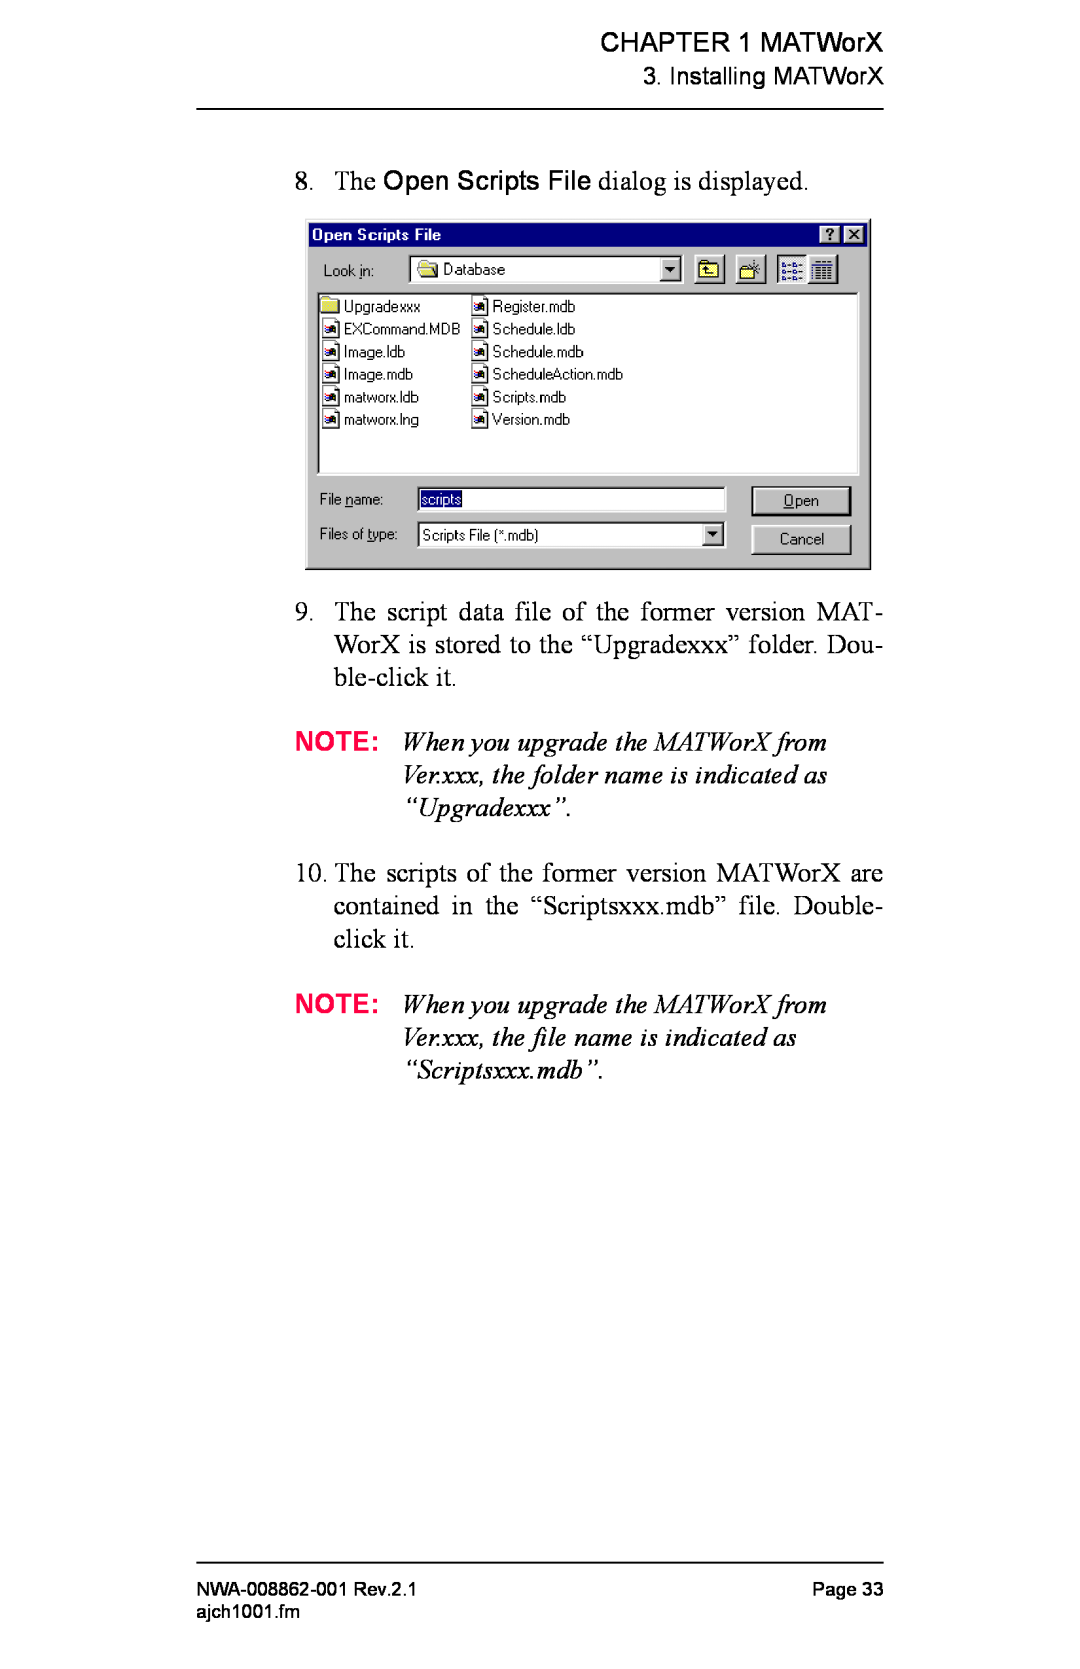 NEC NWA-008862-001 manual The Open Scripts File dialog is displayed 